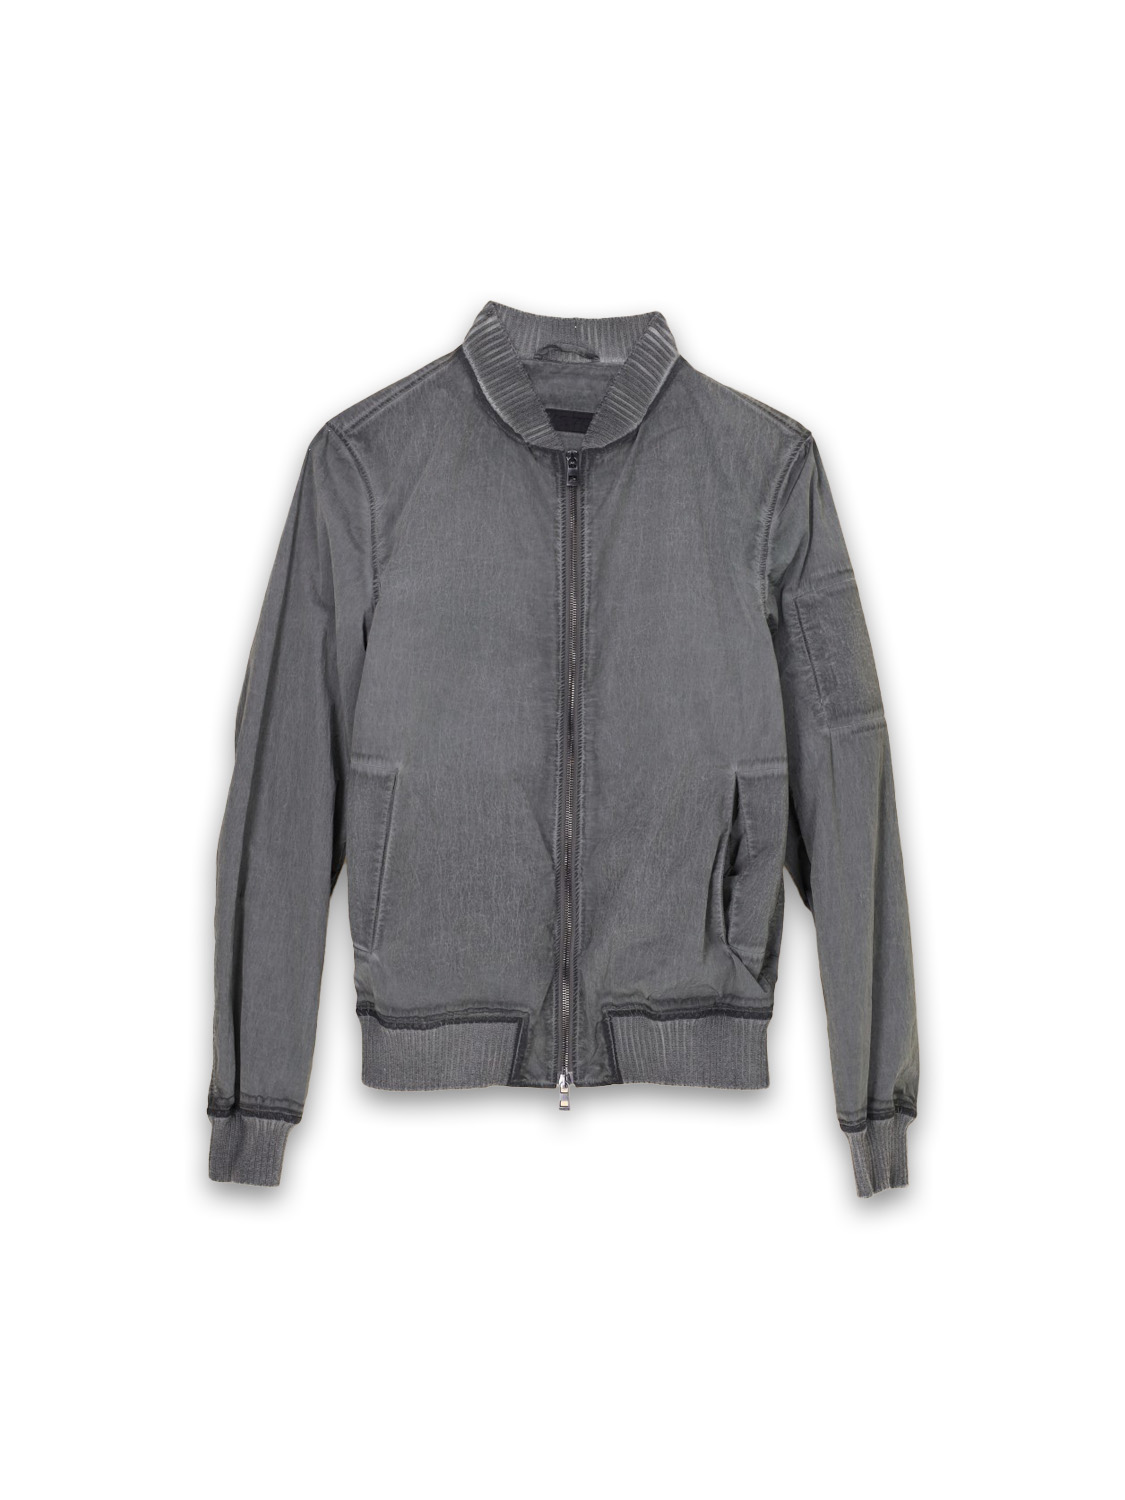 Lightweight bomber jacket made of technical fabric with a used look 